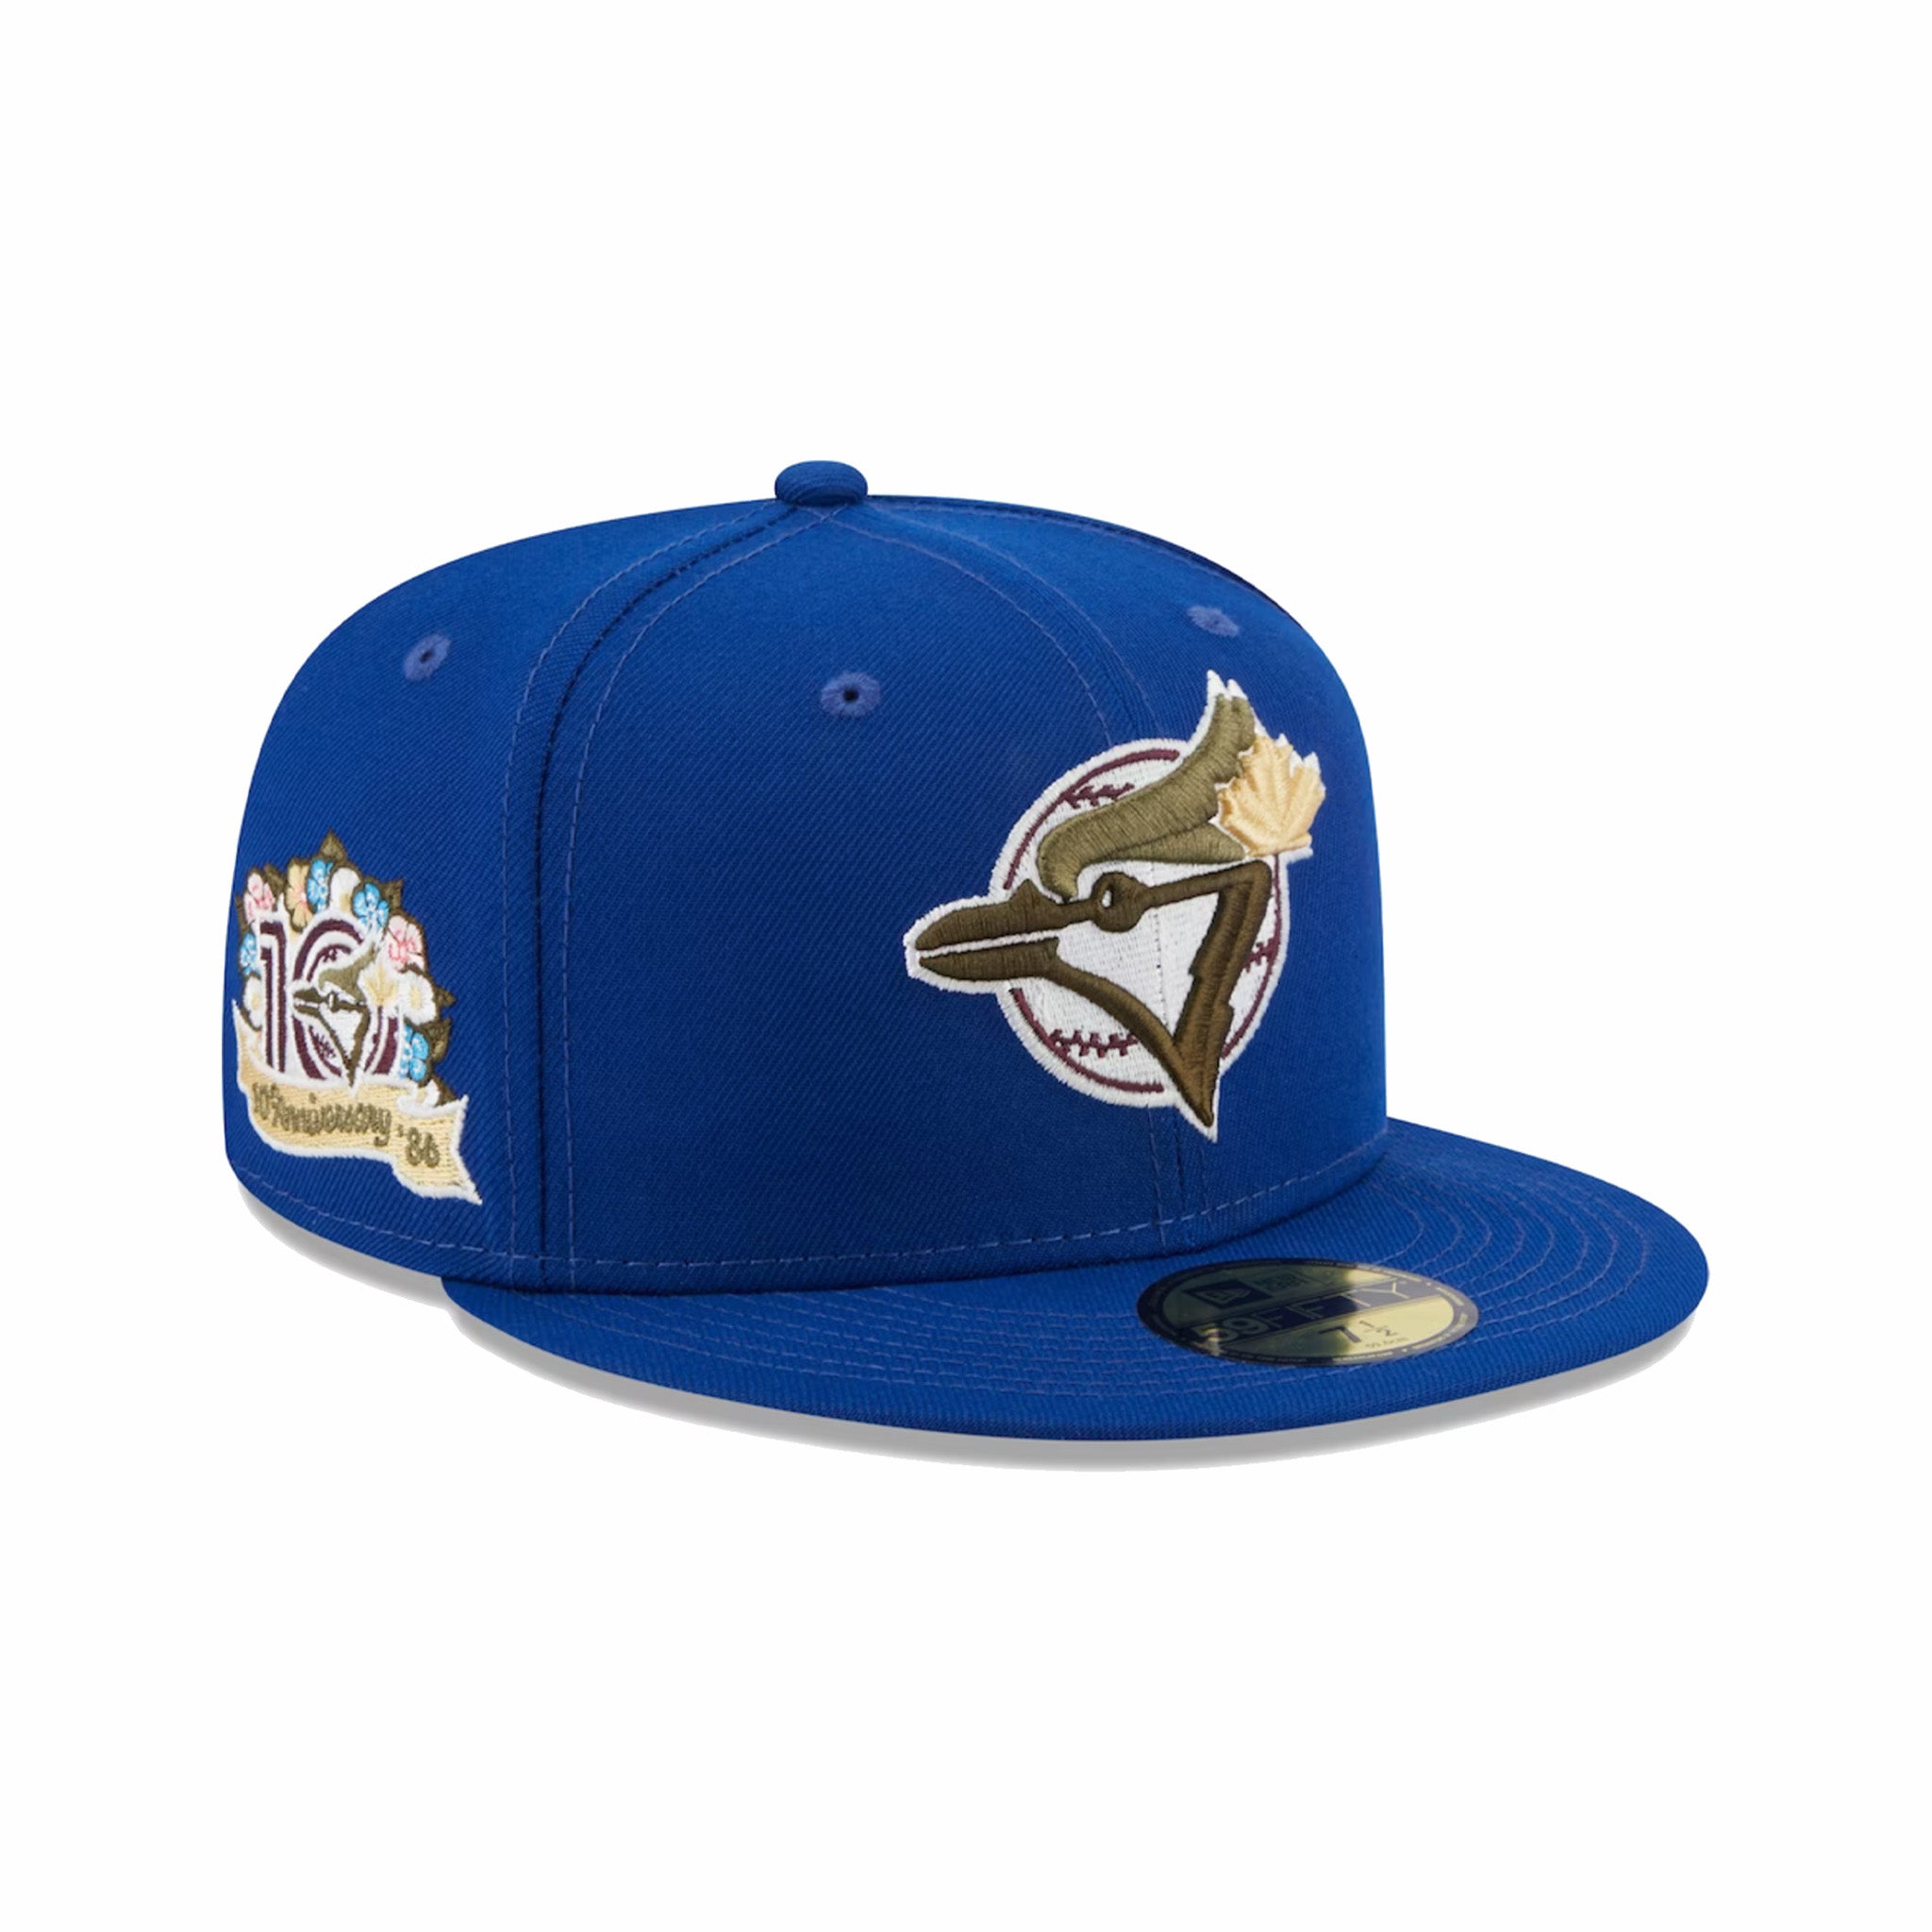 Toronto Blue Jays Pinstripe 59Fifty Fitted Hat by MLB x New Era